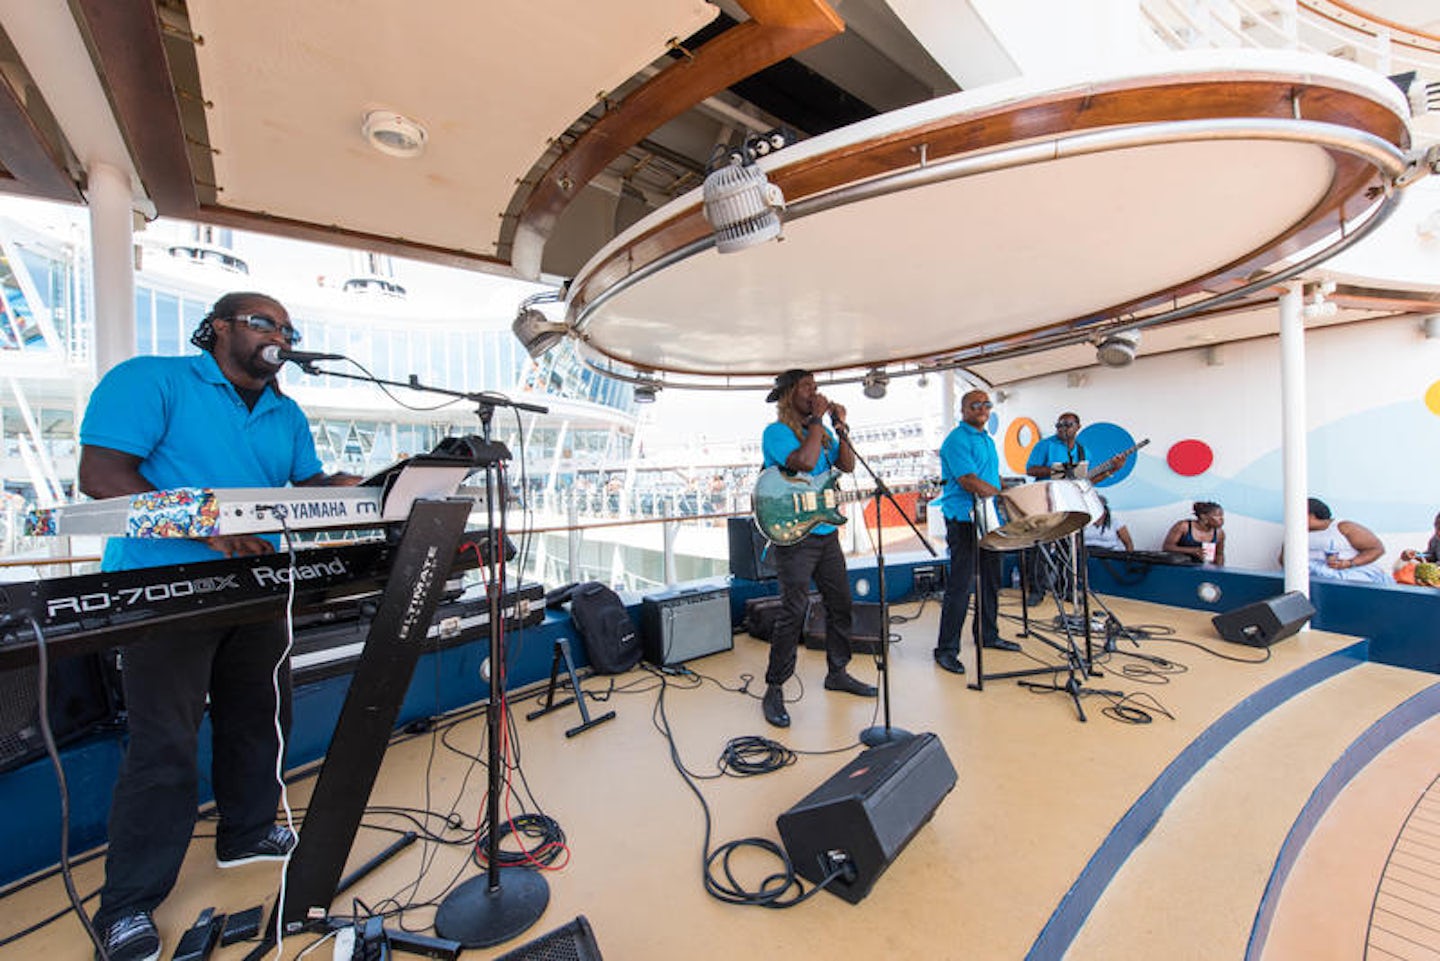 Live Music at the Pools on Oasis of the Seas